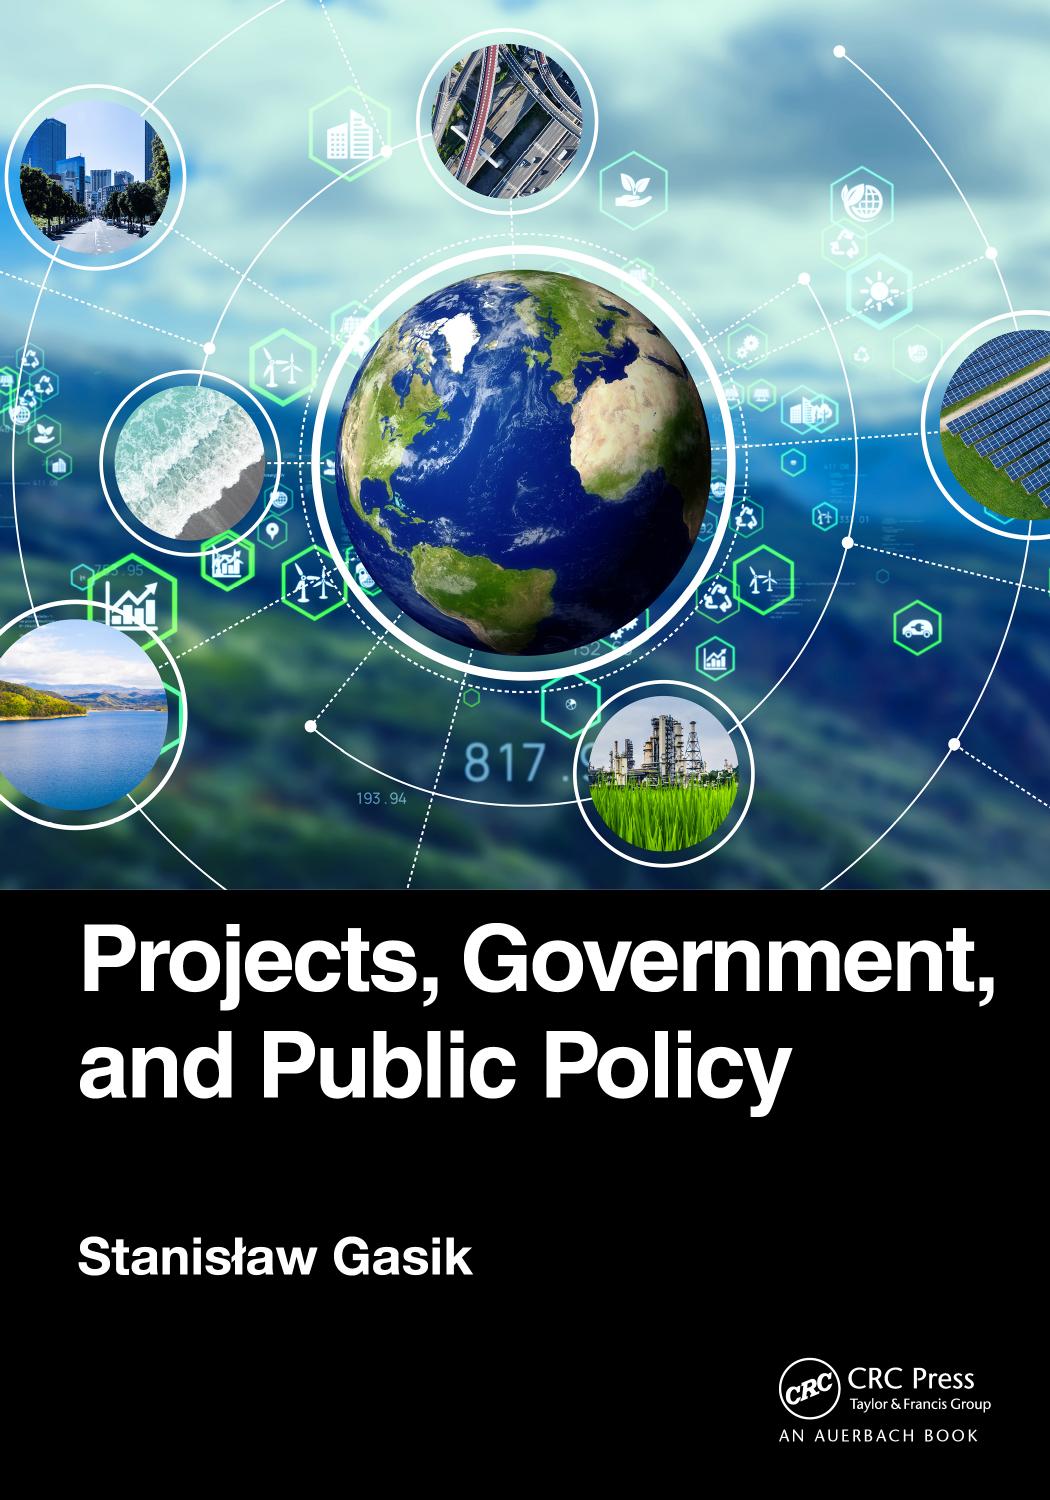 Projects, Government, and Public Policy by Stanislaw Gasik